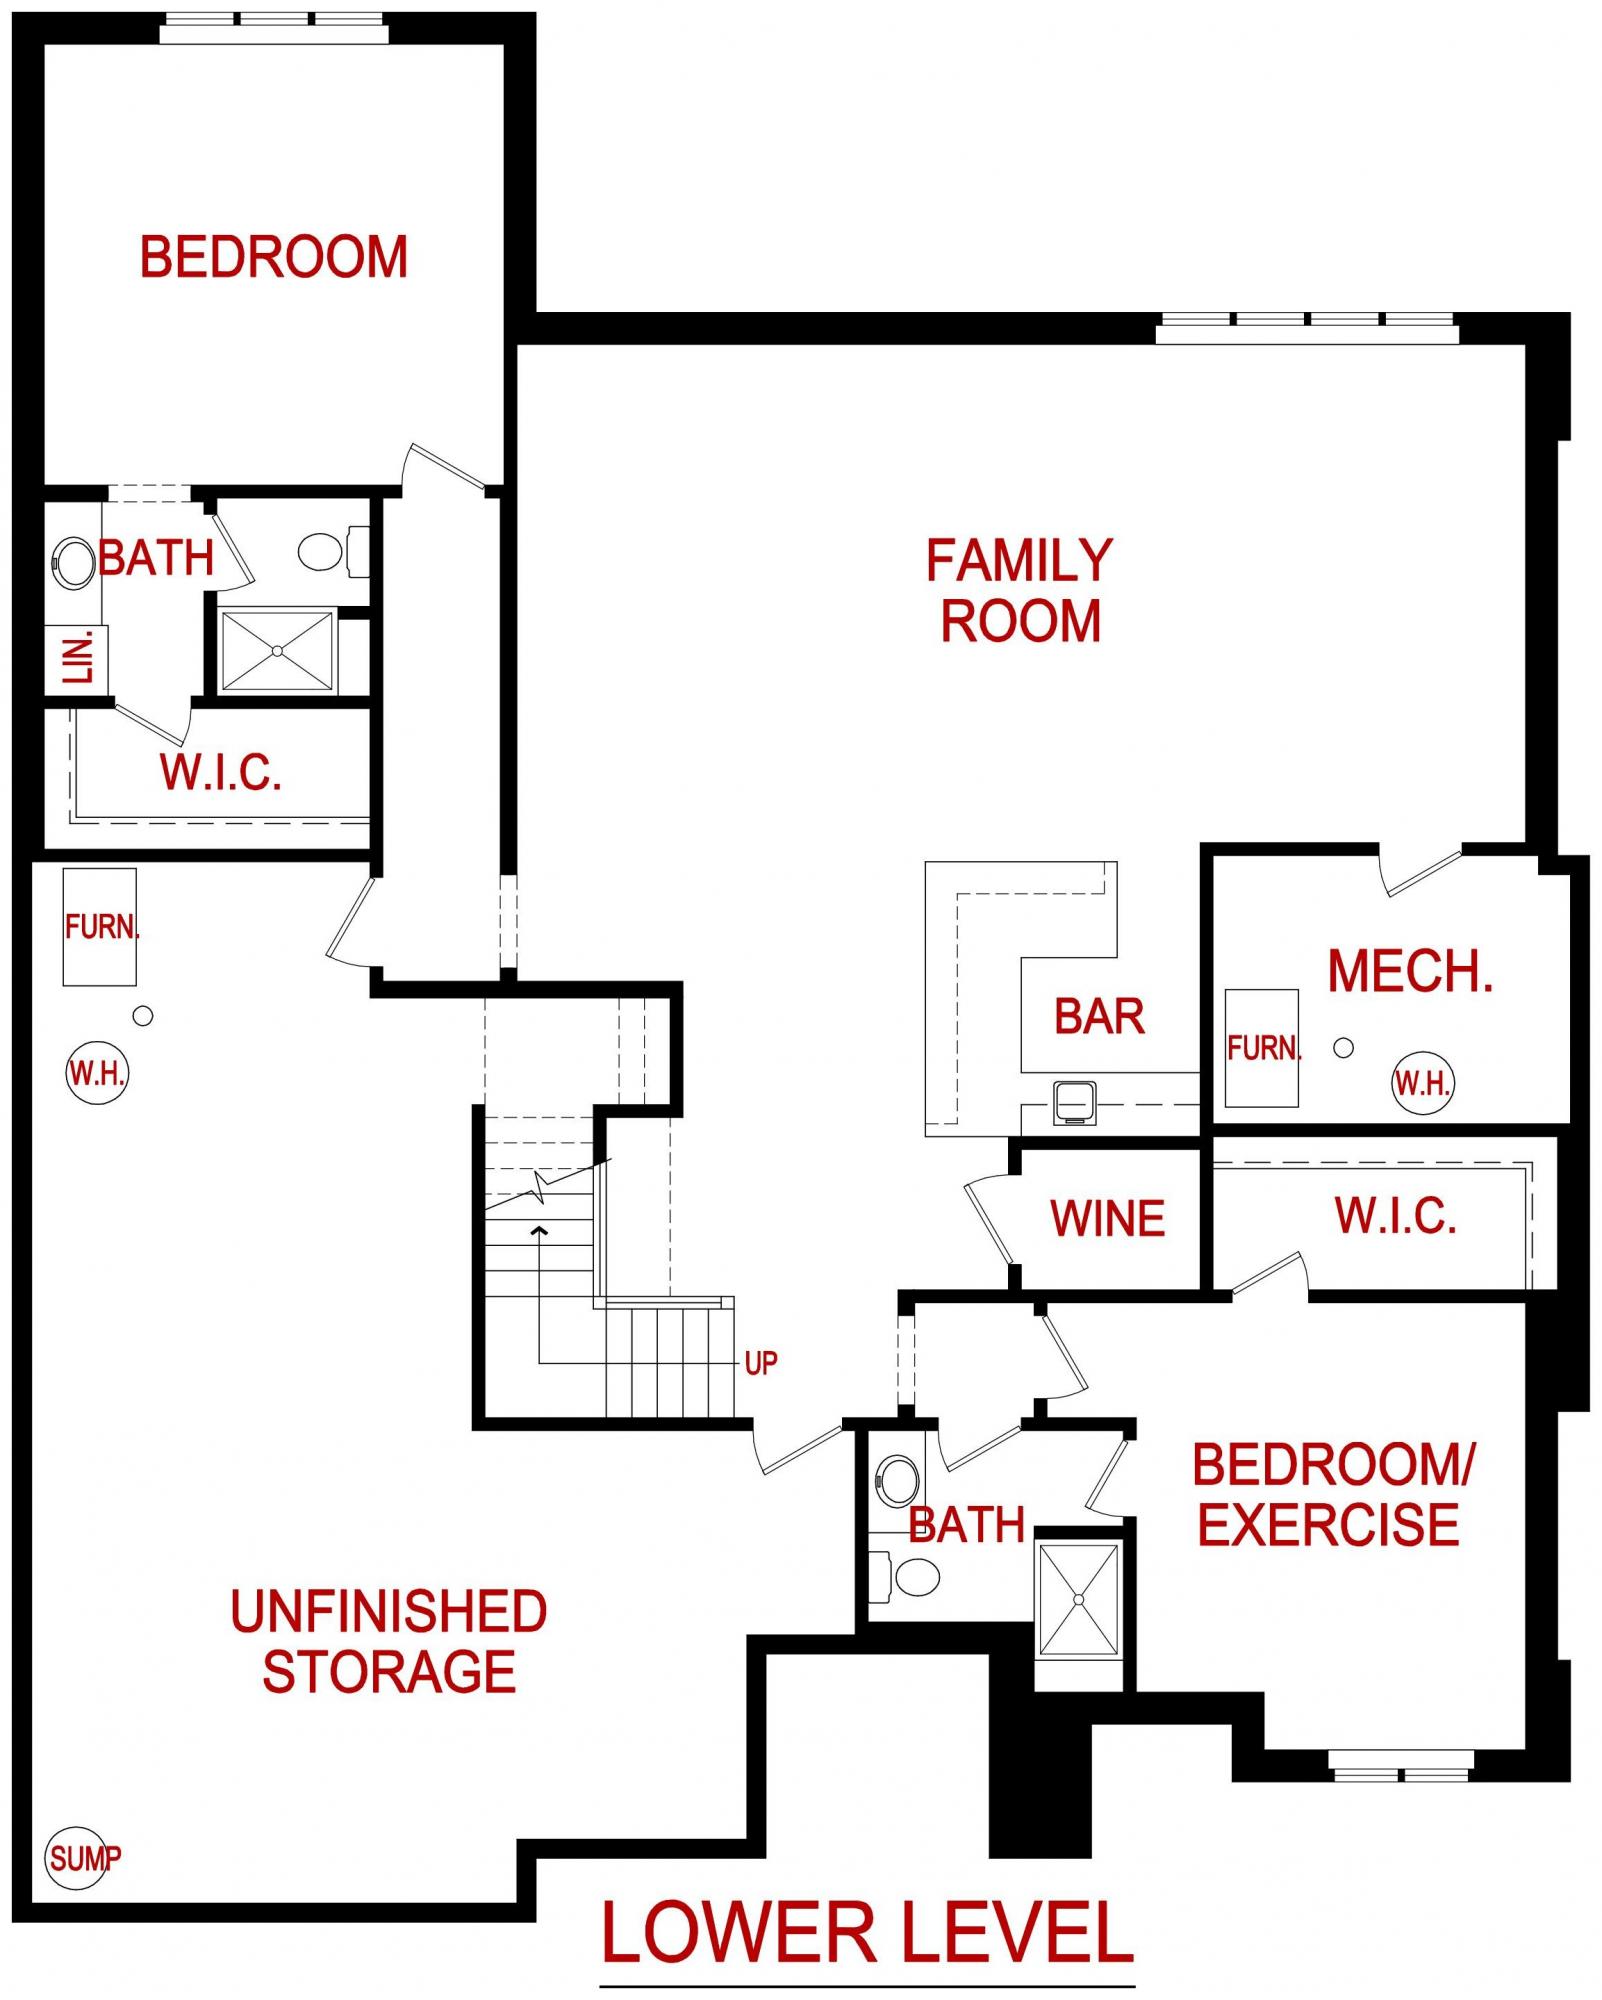 Lower level floor plan of a Peachtree model from Lambie Custom Homes